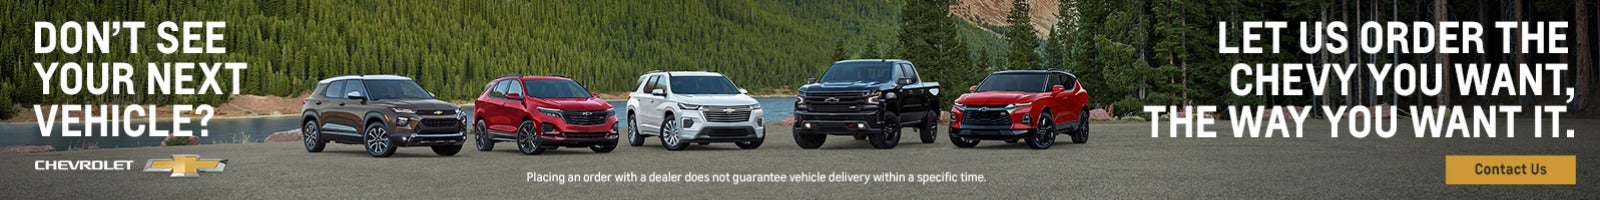 Let us order the chevy you want.